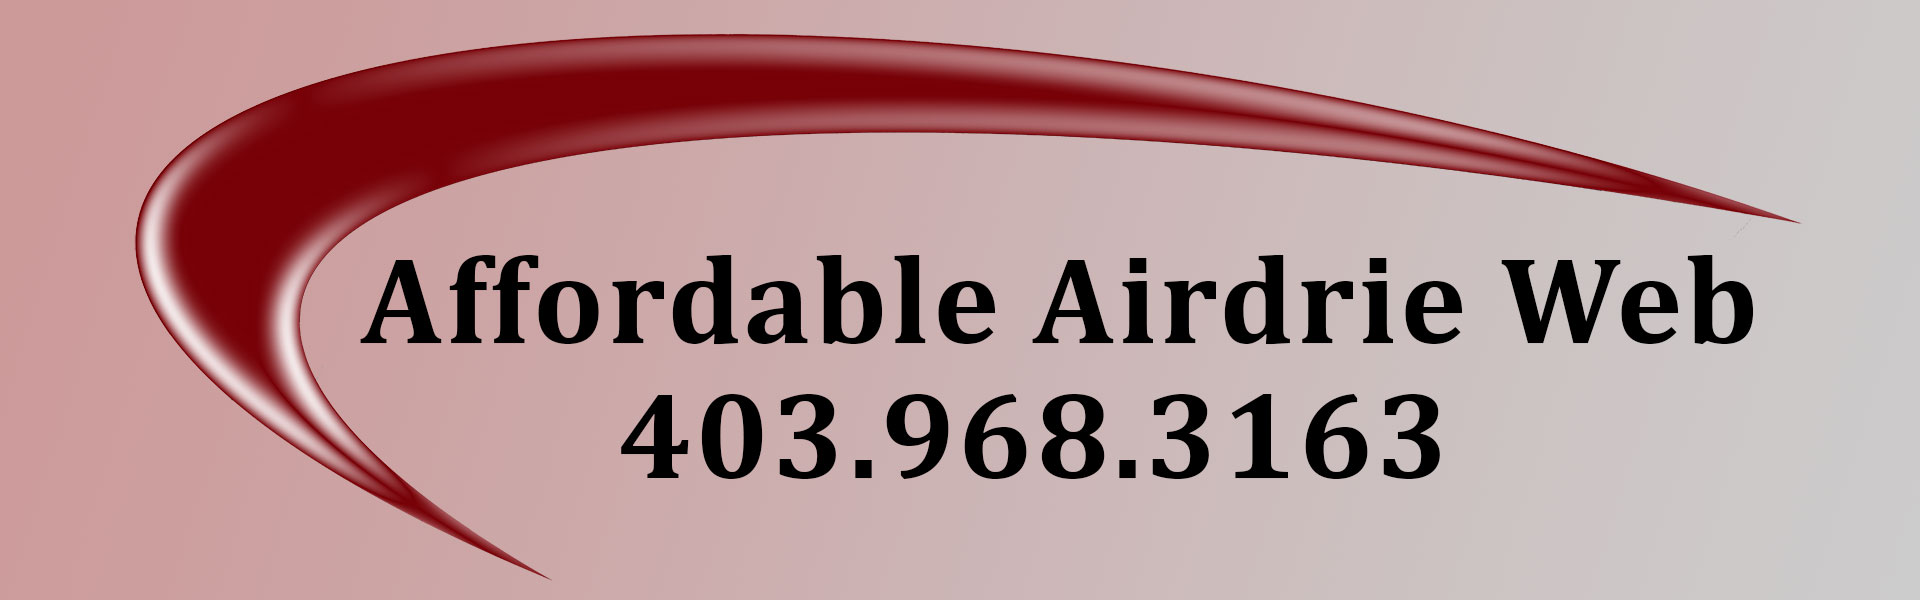  Contact Affordable Airdrie Web, a custom web design and development firm serving Airdrie and the Calgary region